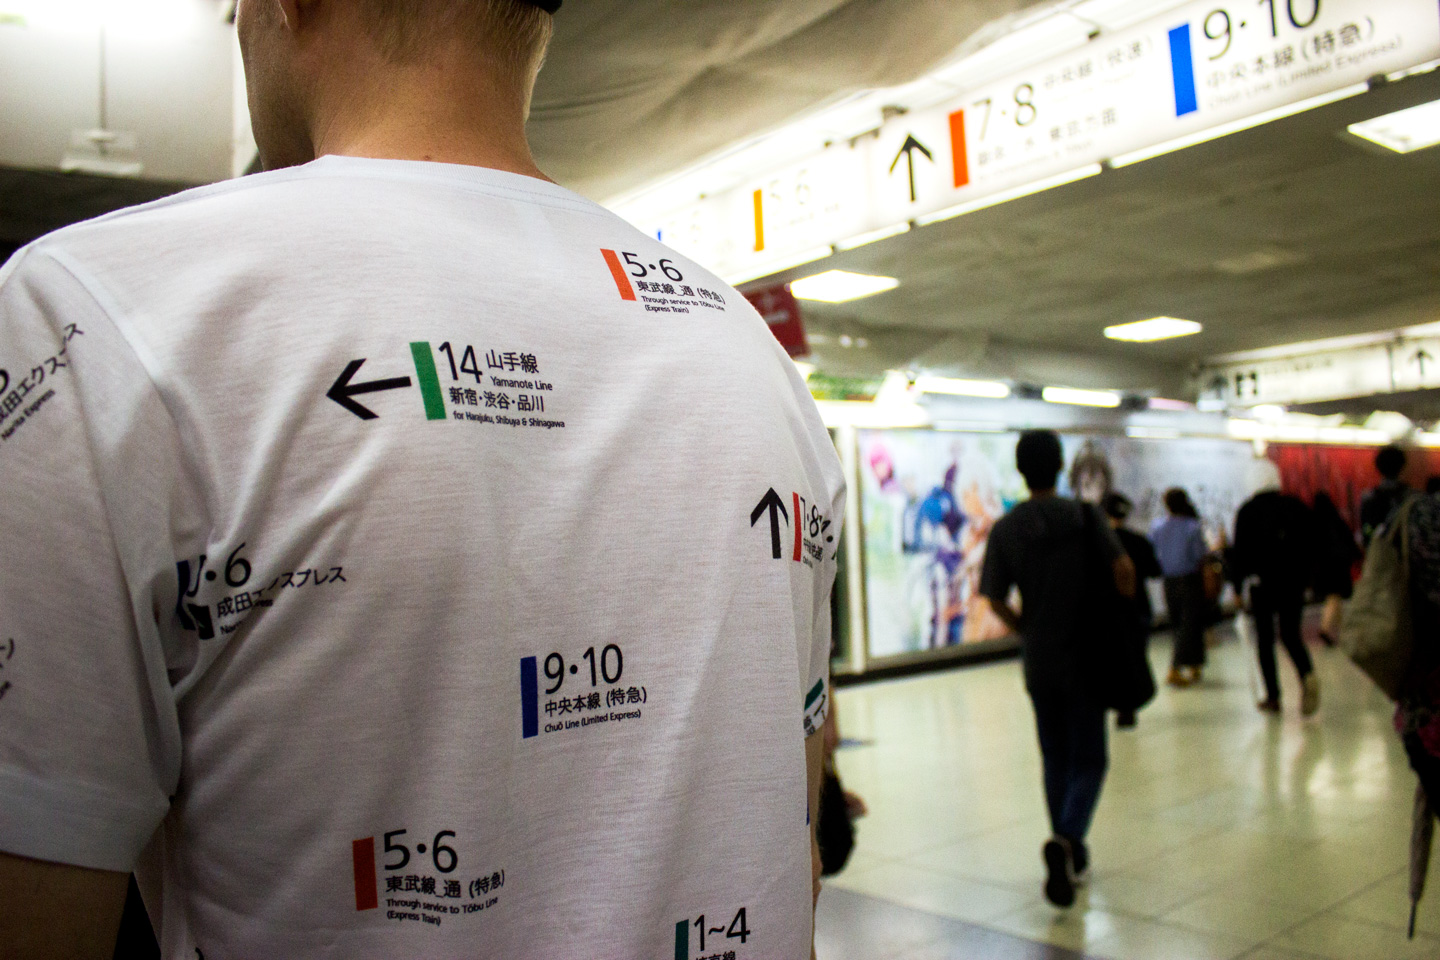 Tokyo Signs™ - Products inspired by the streets of Tokyo - Shinjuku Station Signage T-shirt